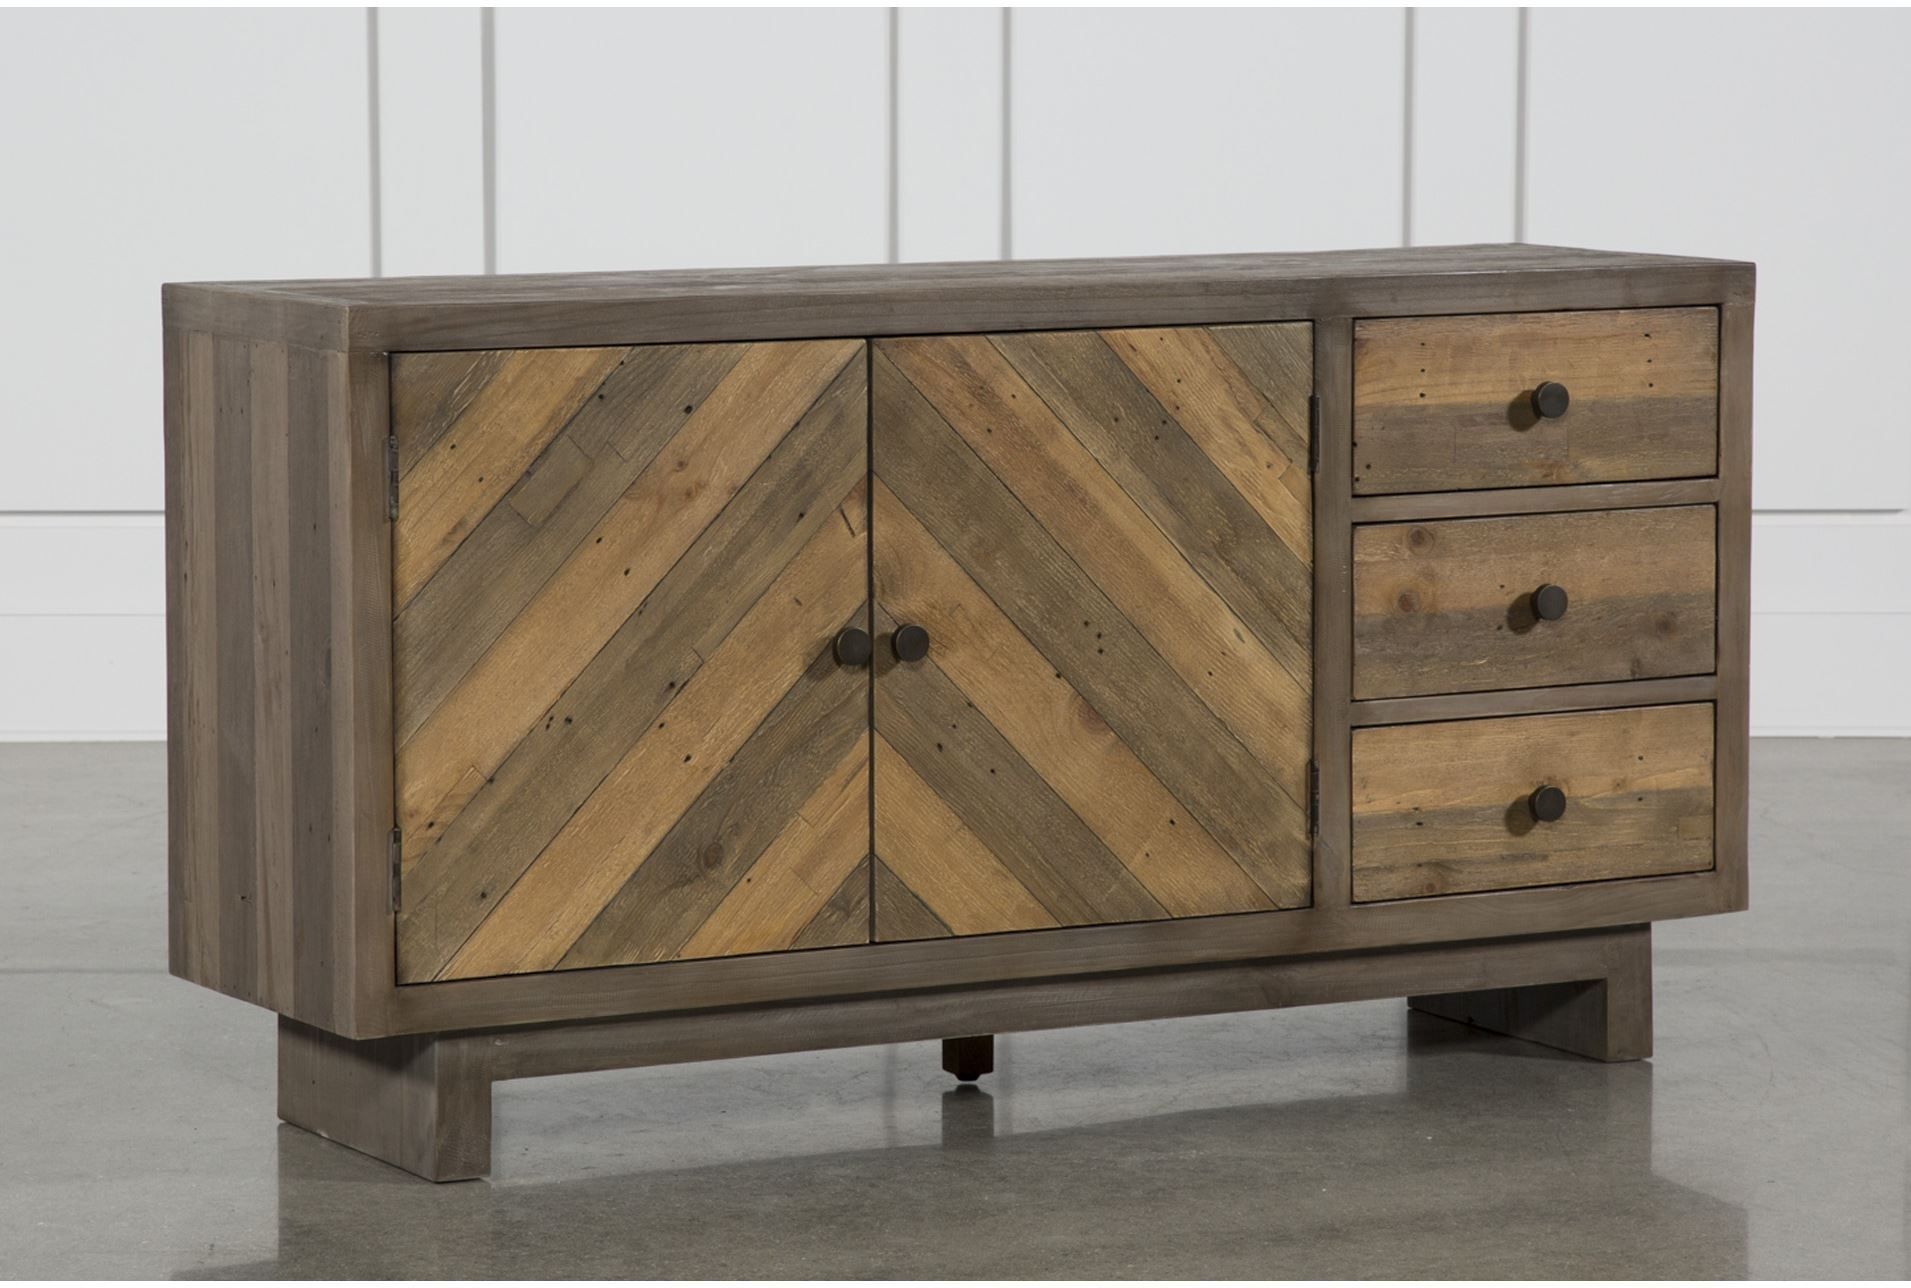 Otb Aged Pine 3 Drawer/2 Door Sideboard, Brown | Pinterest | Products Intended For Burnt Oak Bleached Pine Sideboards (View 10 of 30)